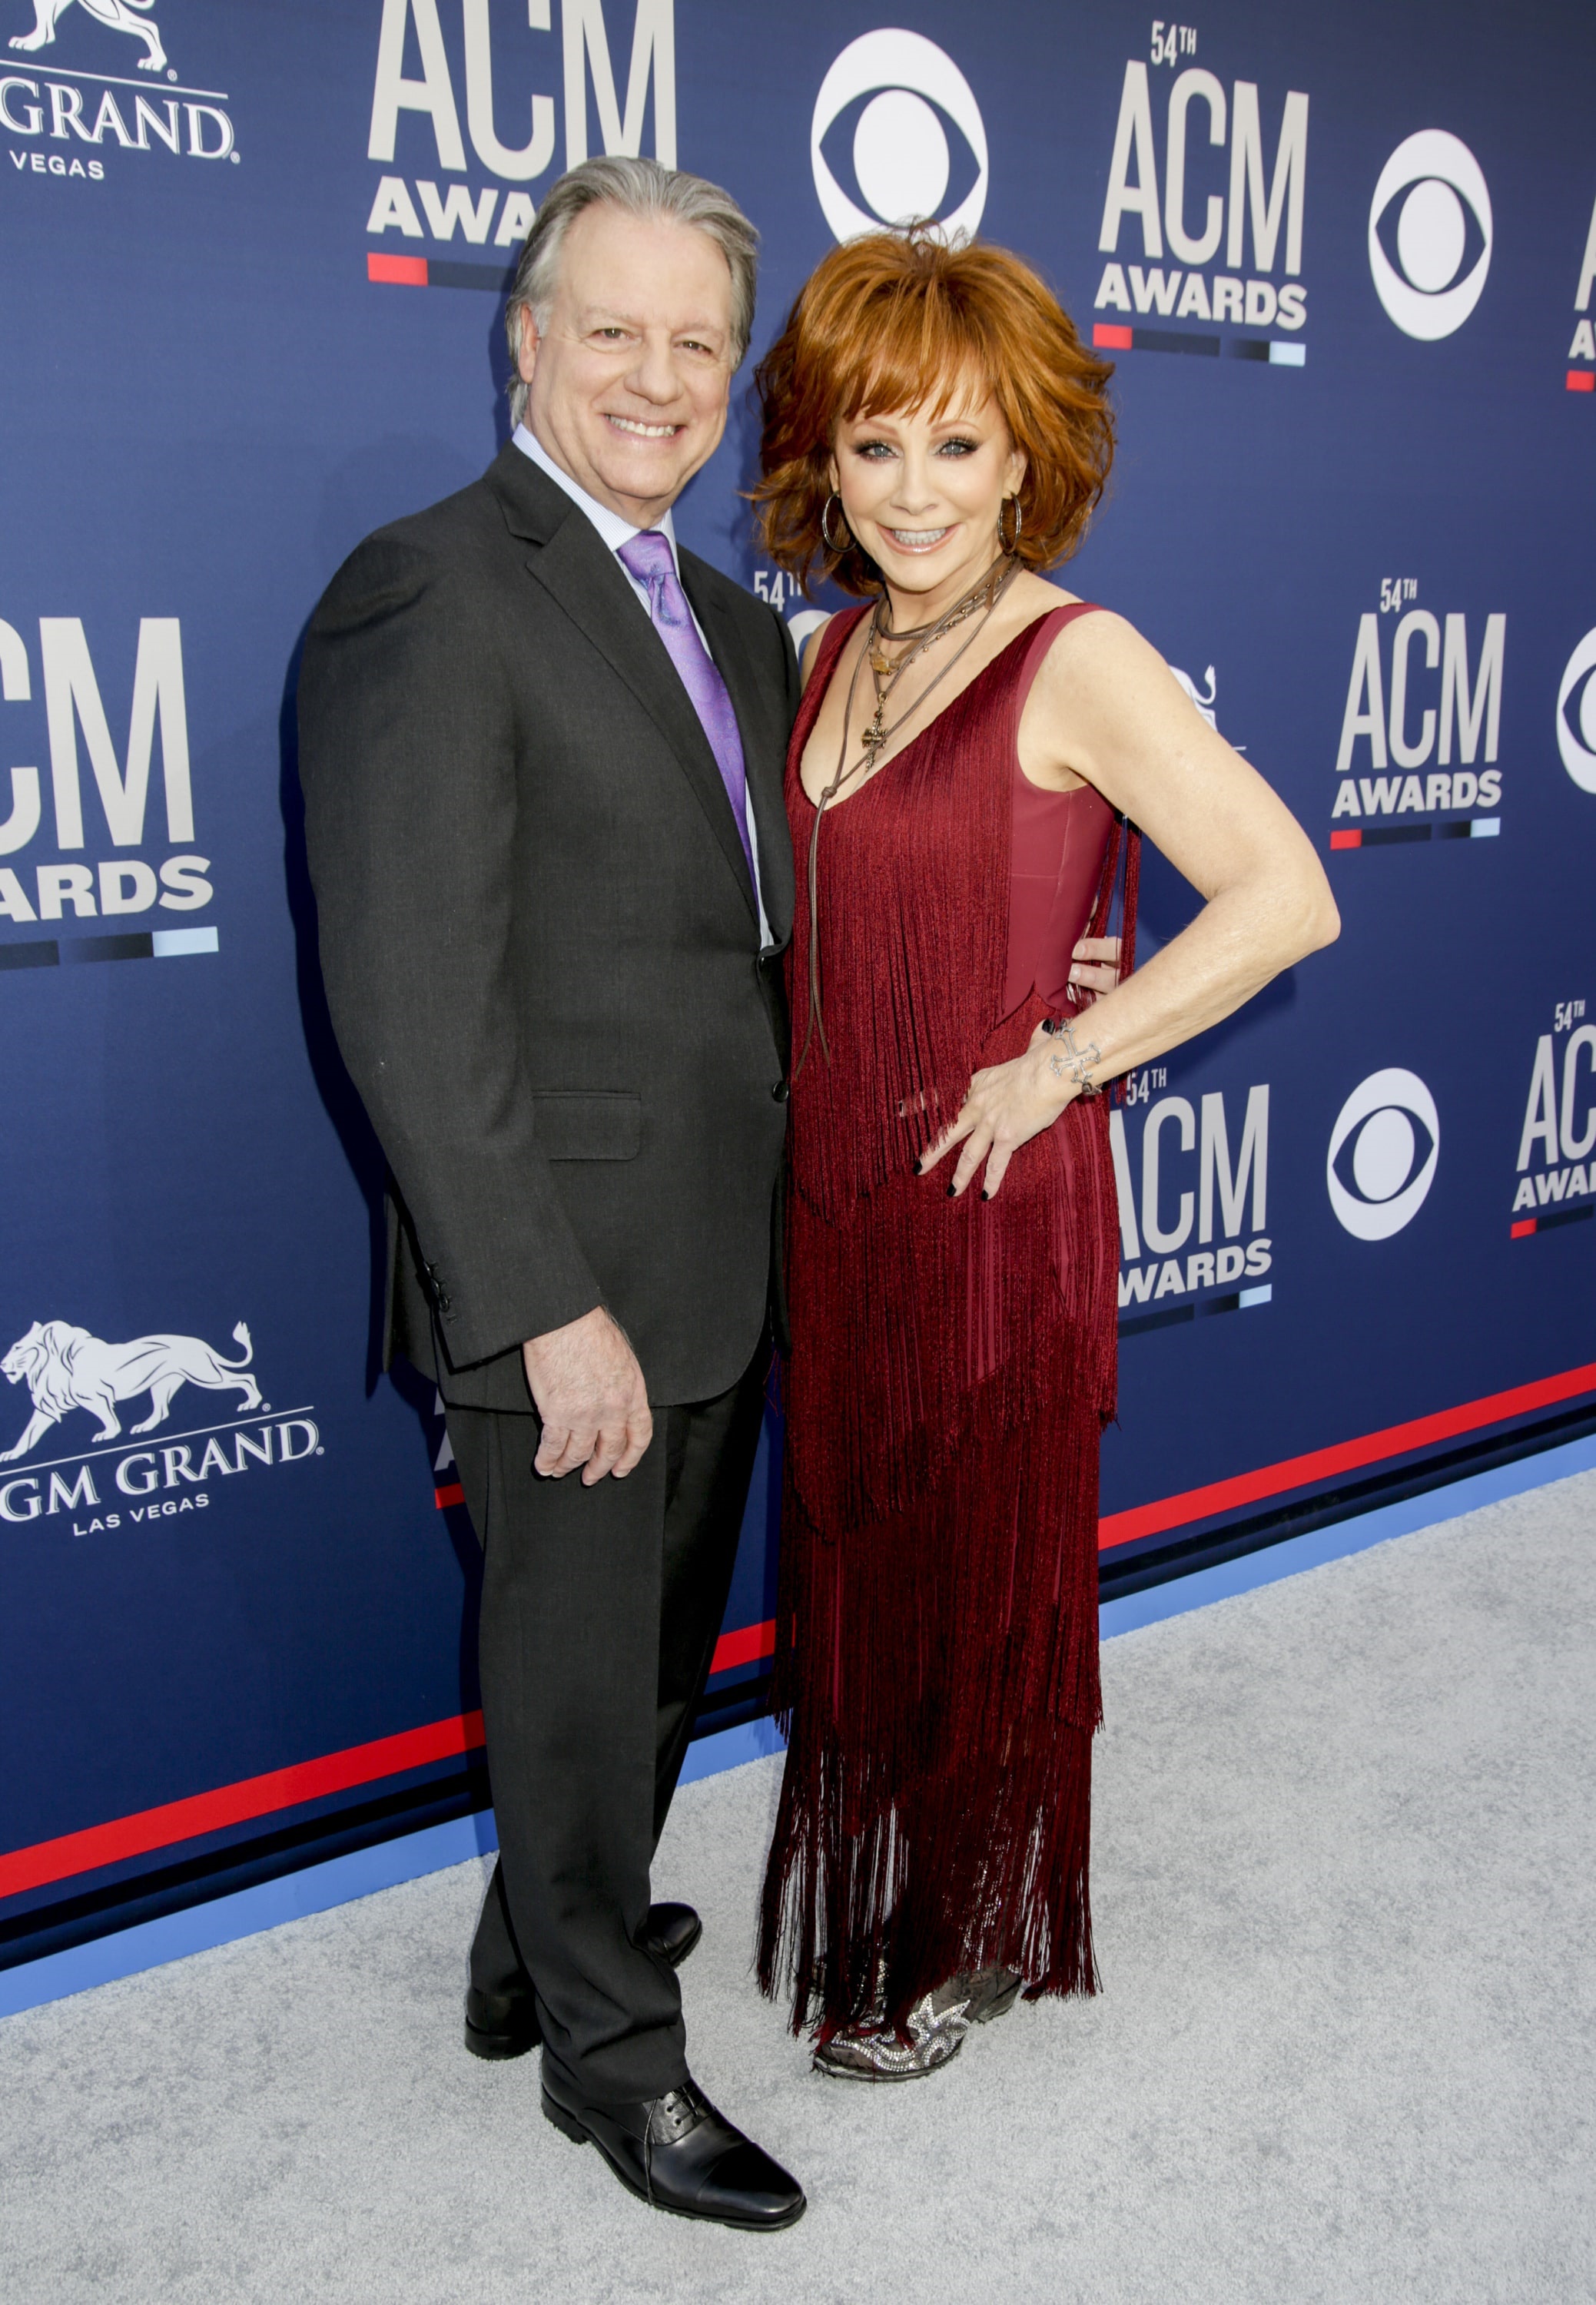 Host Reba McEntire with Anthony "Skeeter" Lasuzzo attends the 54TH ACADEMY OF COUNTRY MUSIC AWARDS, to broadcast LIVE from MGM Grand Garden Arena in Las Vegas Sunday, April 7, 2019 (8:00-11:00 PM, ET/delayed PT) on the CBS Television Network. Photo: Francis Specker/CBS Â©2019 CBS Broadcasting, Inc. All Rights Reserved.